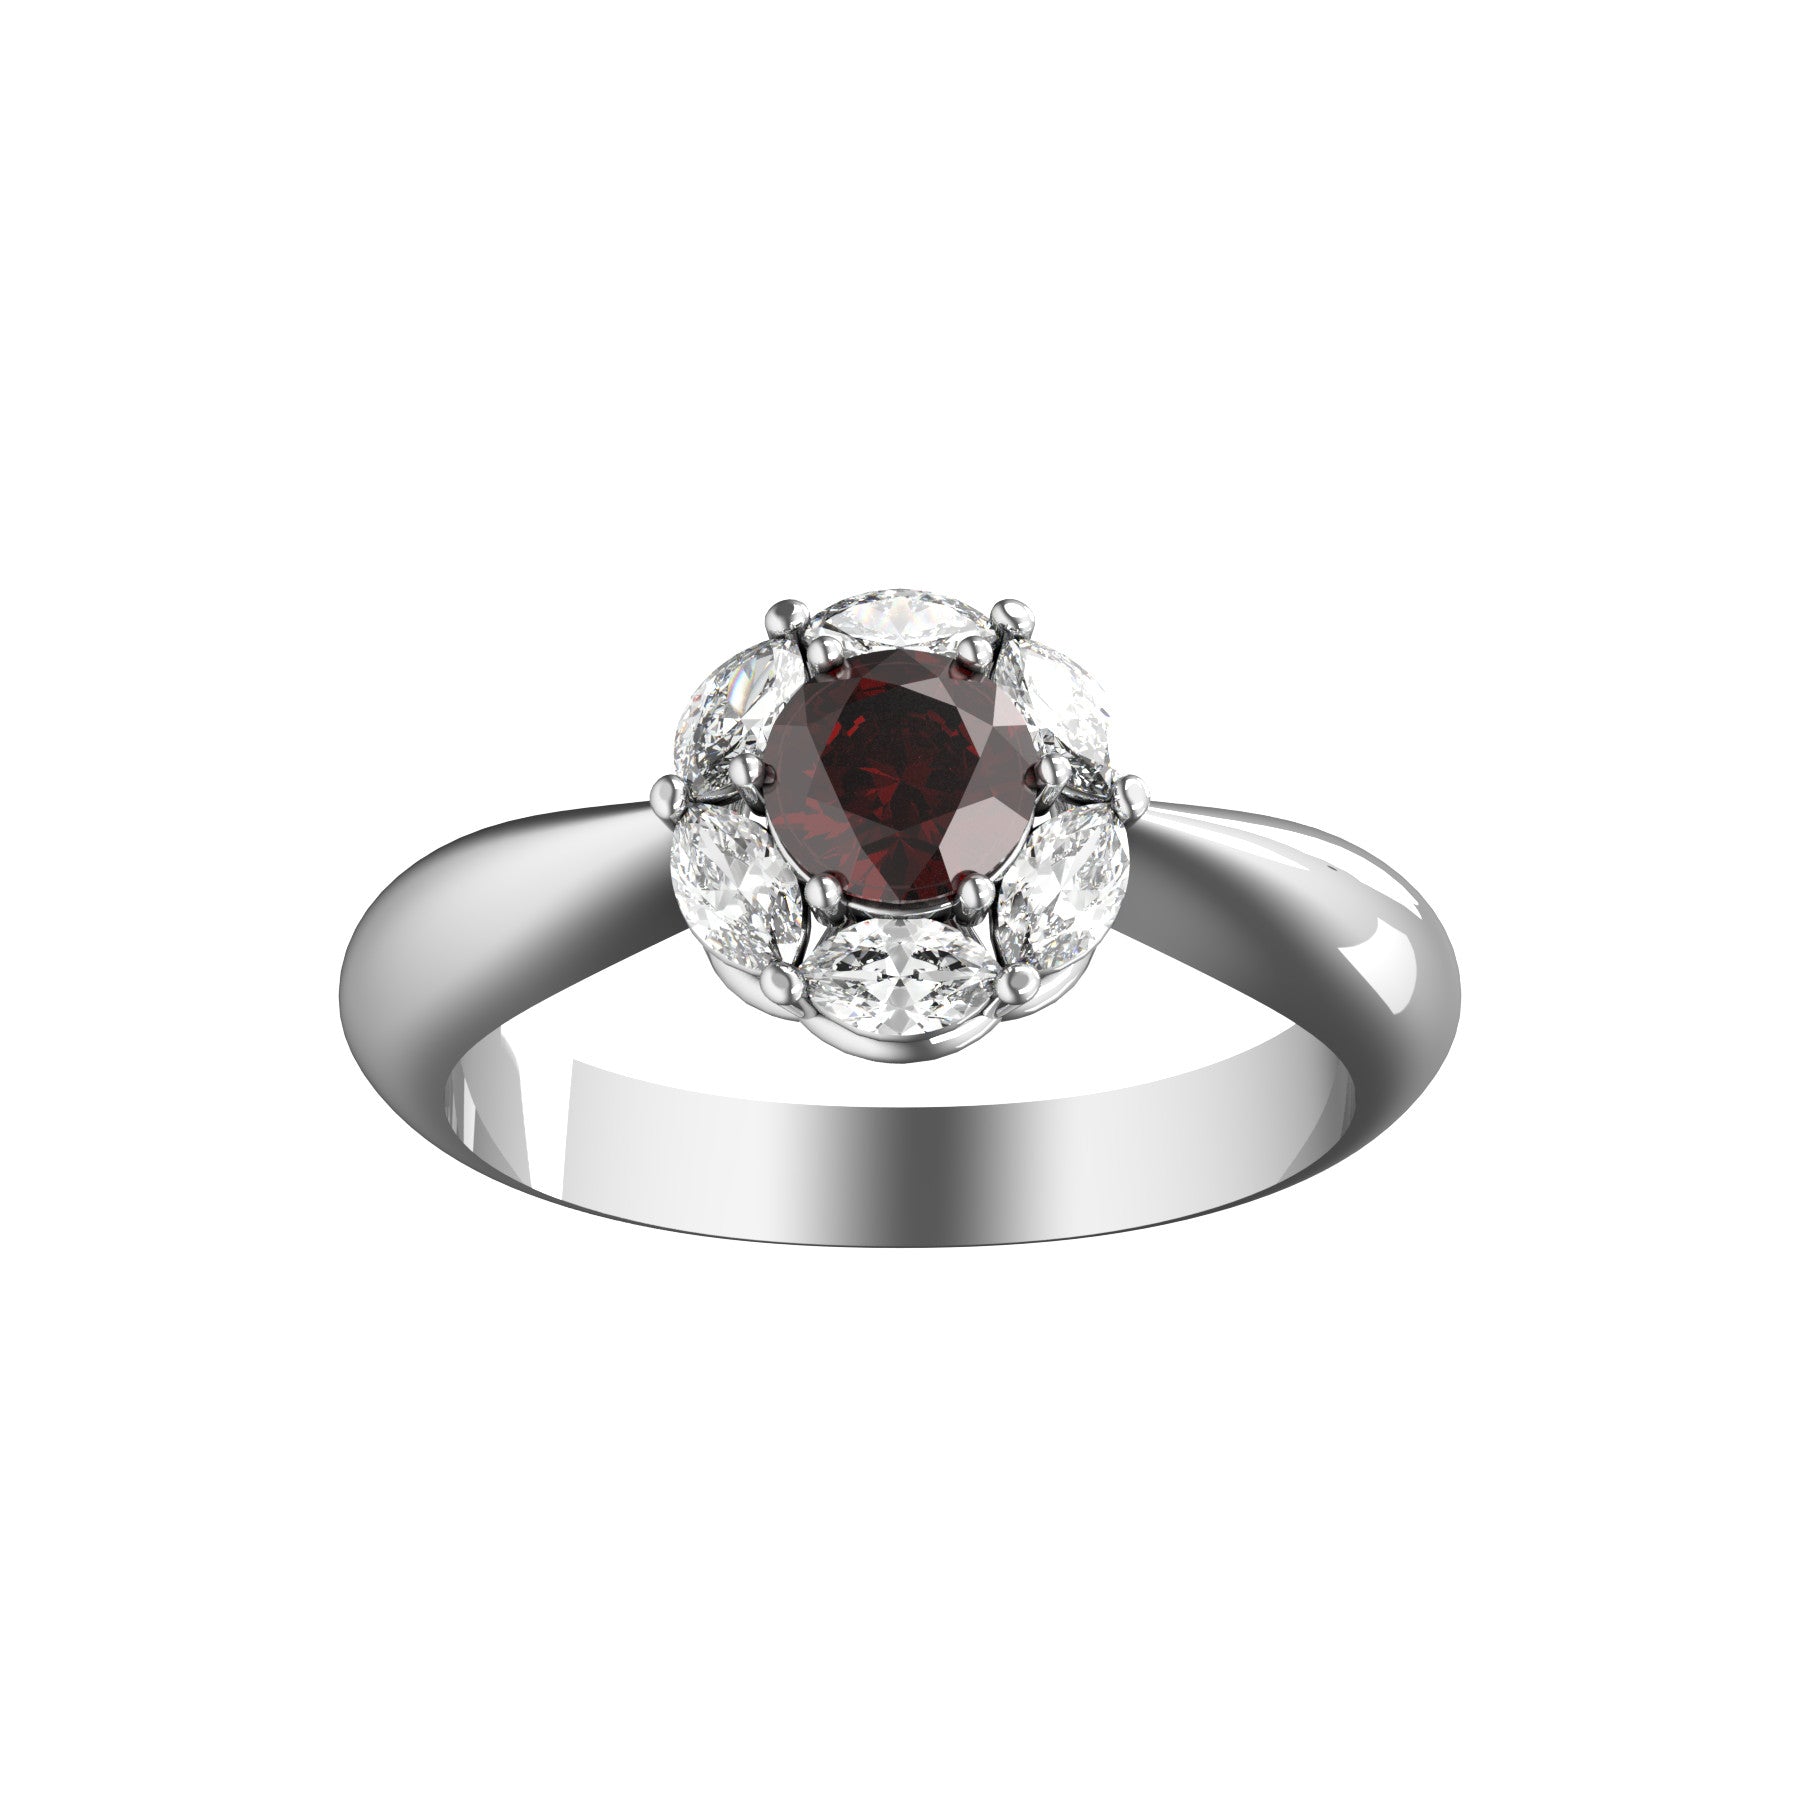 deep love ring, 18 K white gold, about 0,34 ct round natural ruby, navette natural diamonds, weight about 3,5 g. (0.12 oz), width 7,8 mm max